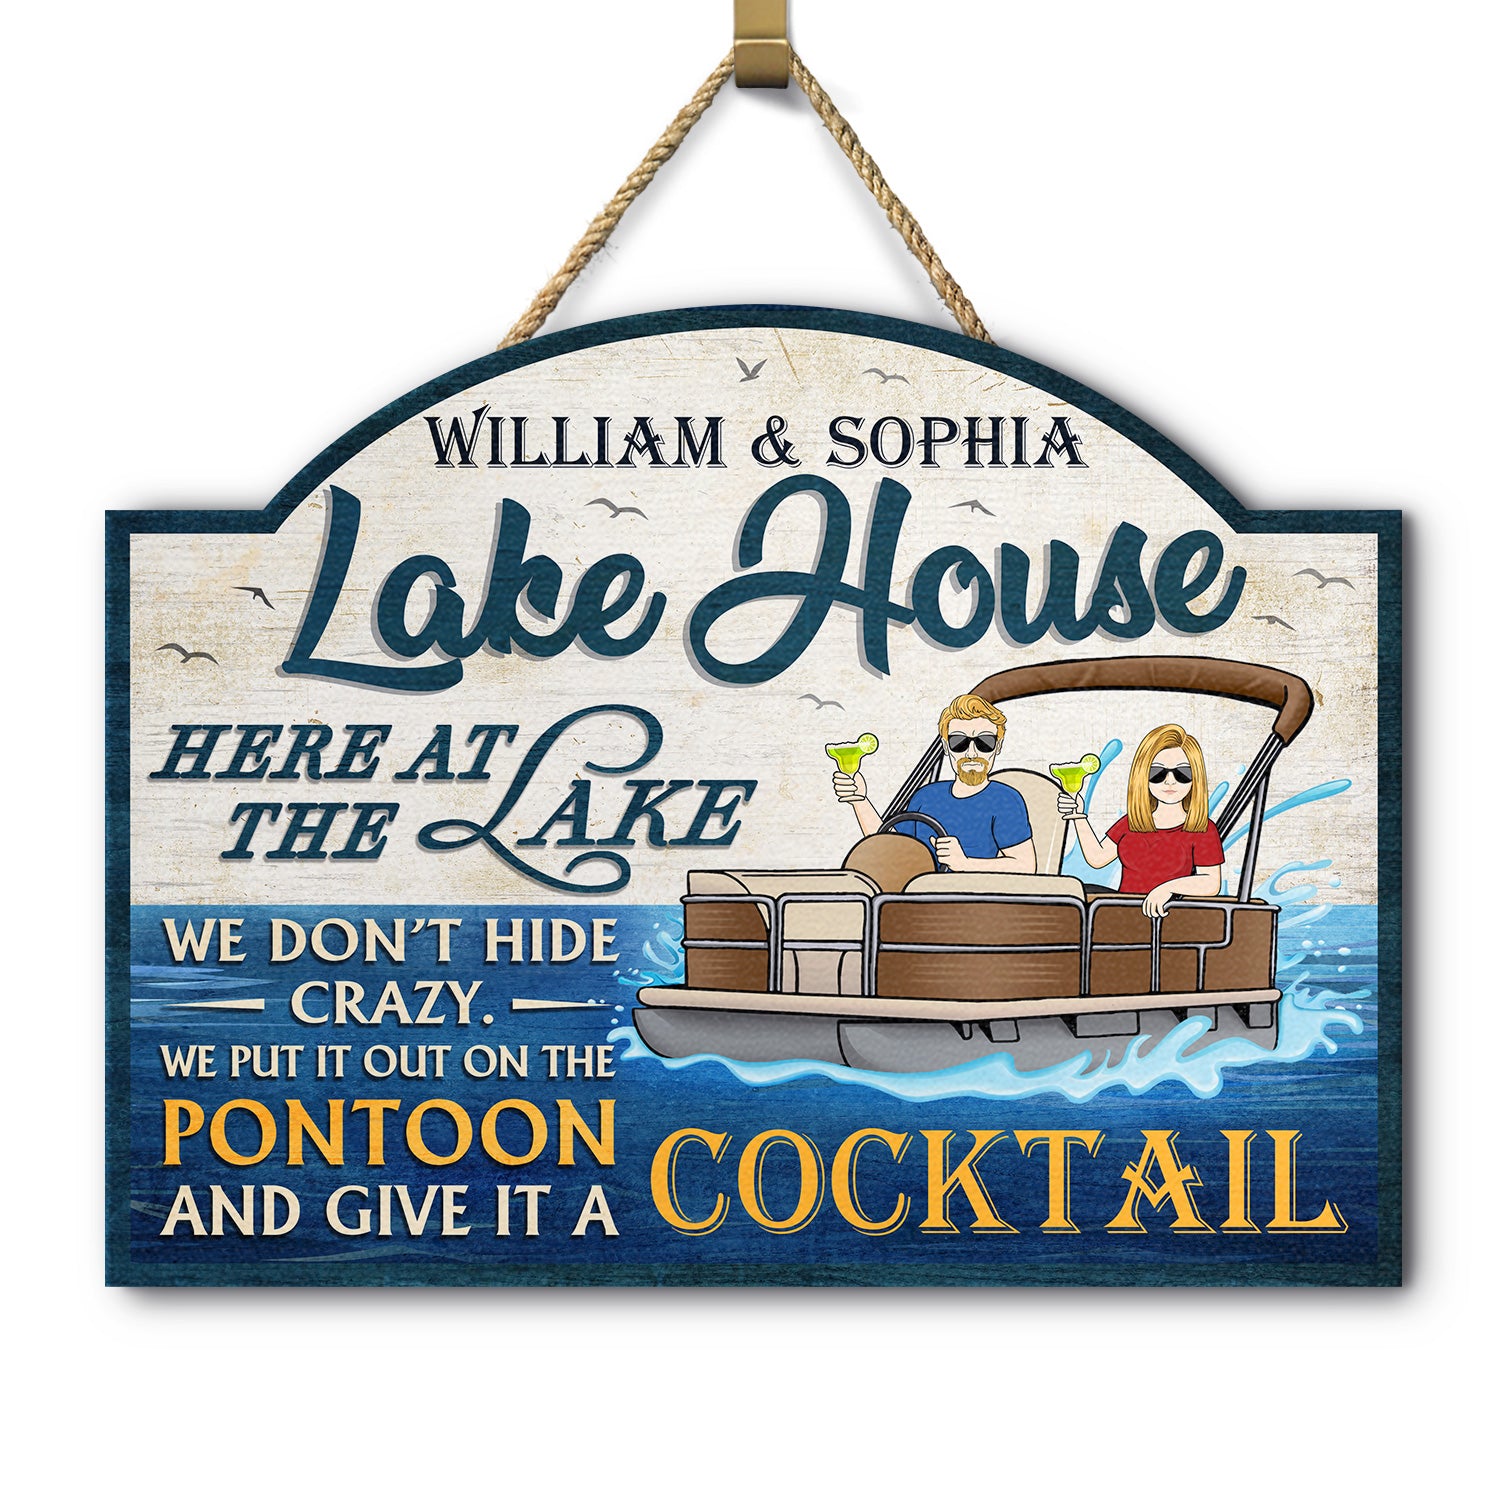 Here At The Lake We Don't Hide Crazy Pontoon - Home Decor, Backyard Decor, Lake House Sign, Gift For Her, Him, Family, Couples, Husband, Wife - Personalized Custom Shaped Wood Sign